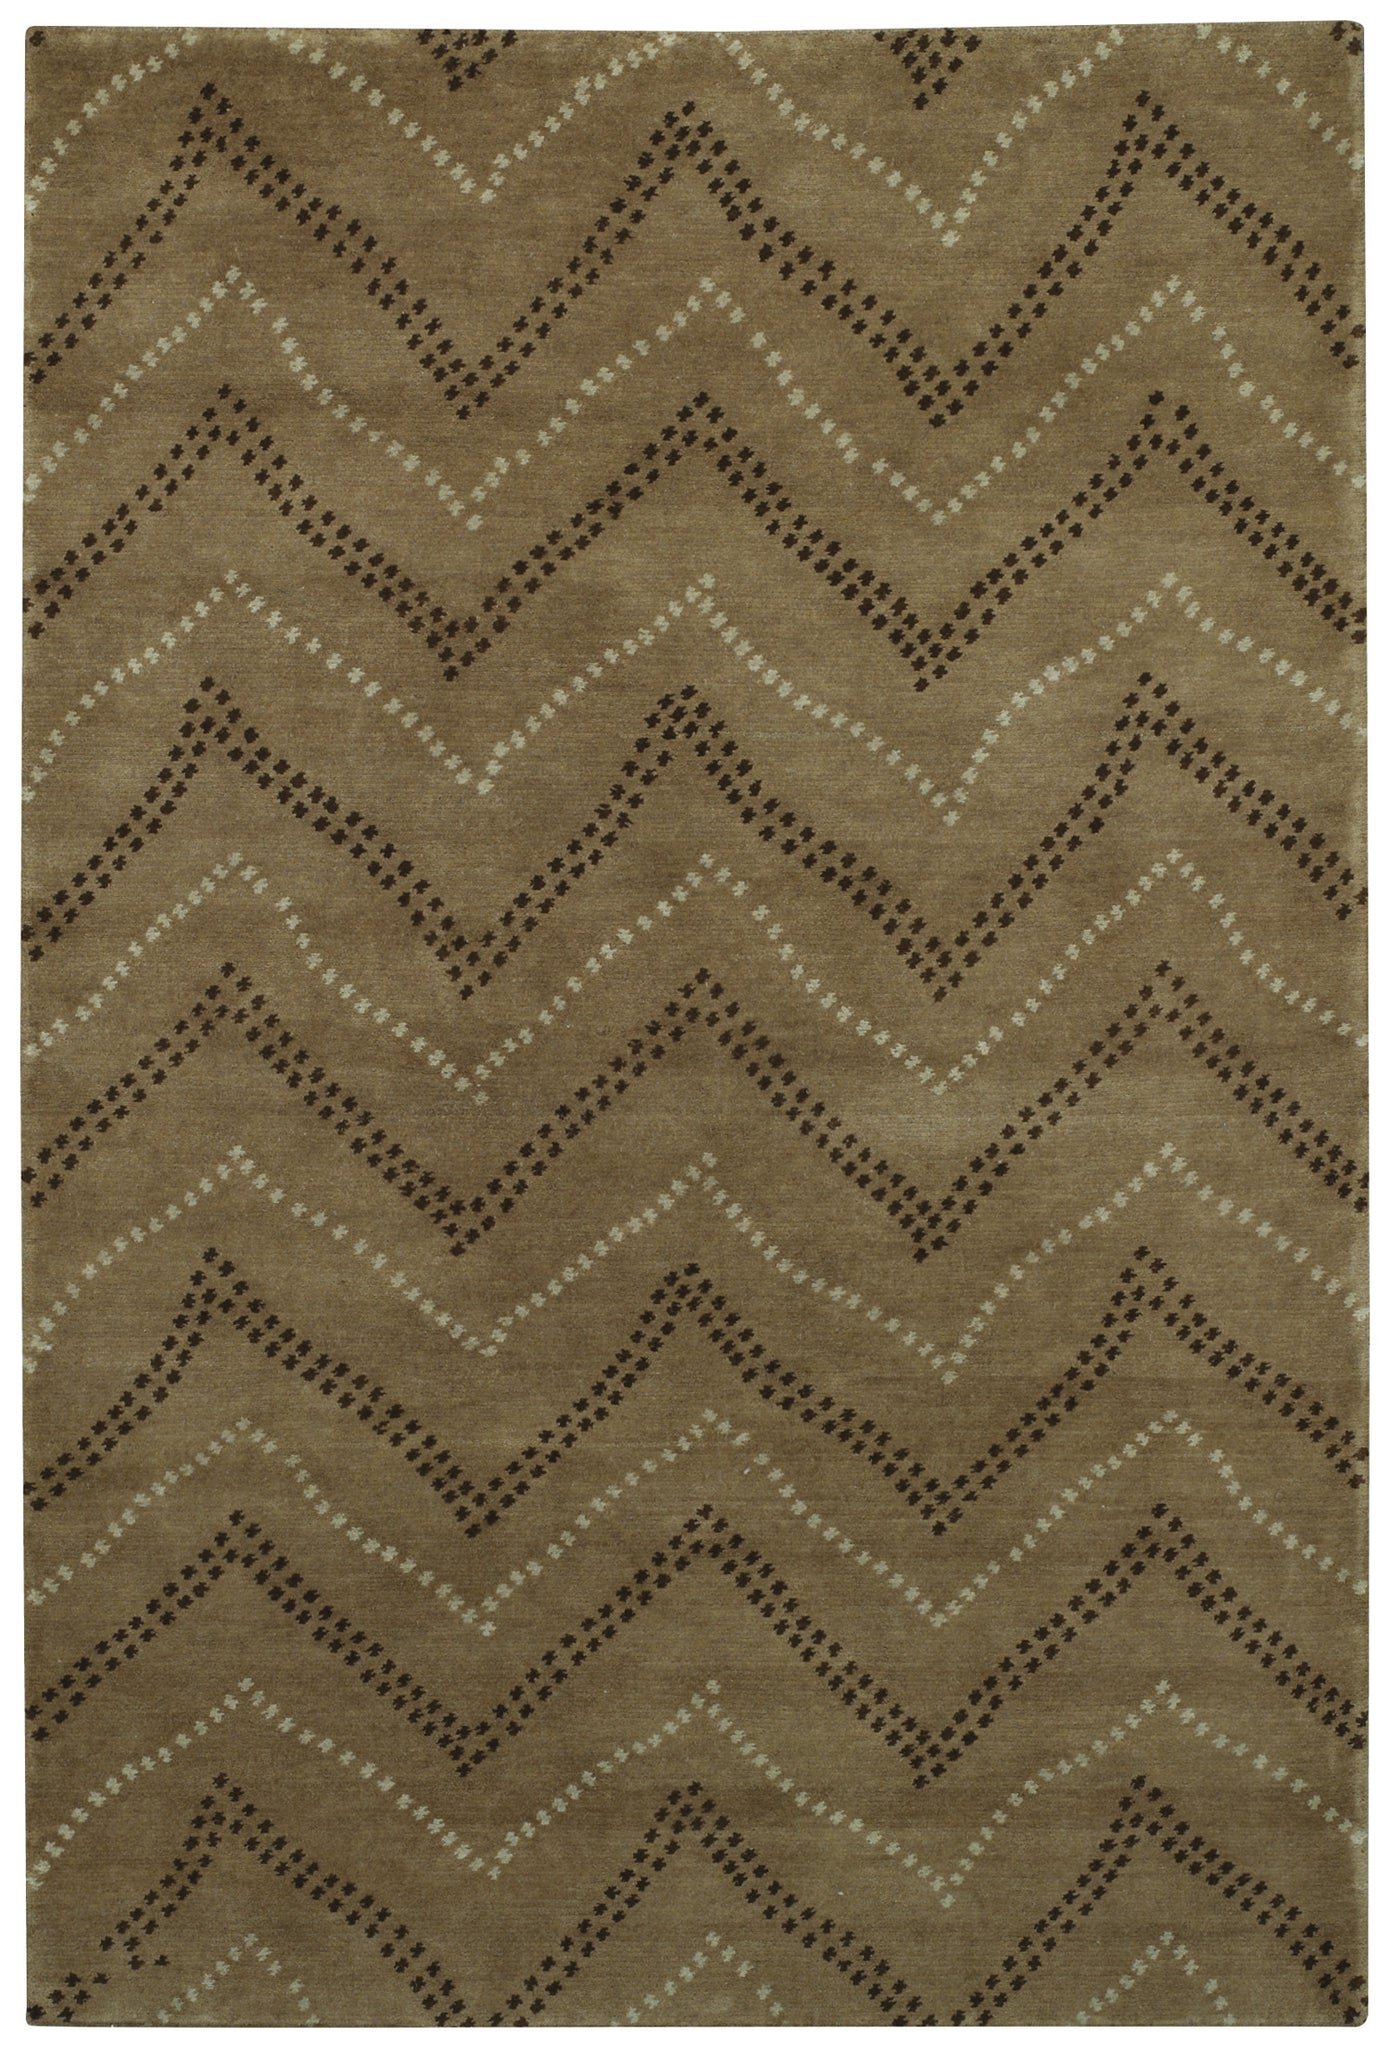 Capel Picturesque-Whimsy 1624 Chocolate Area Rug main image